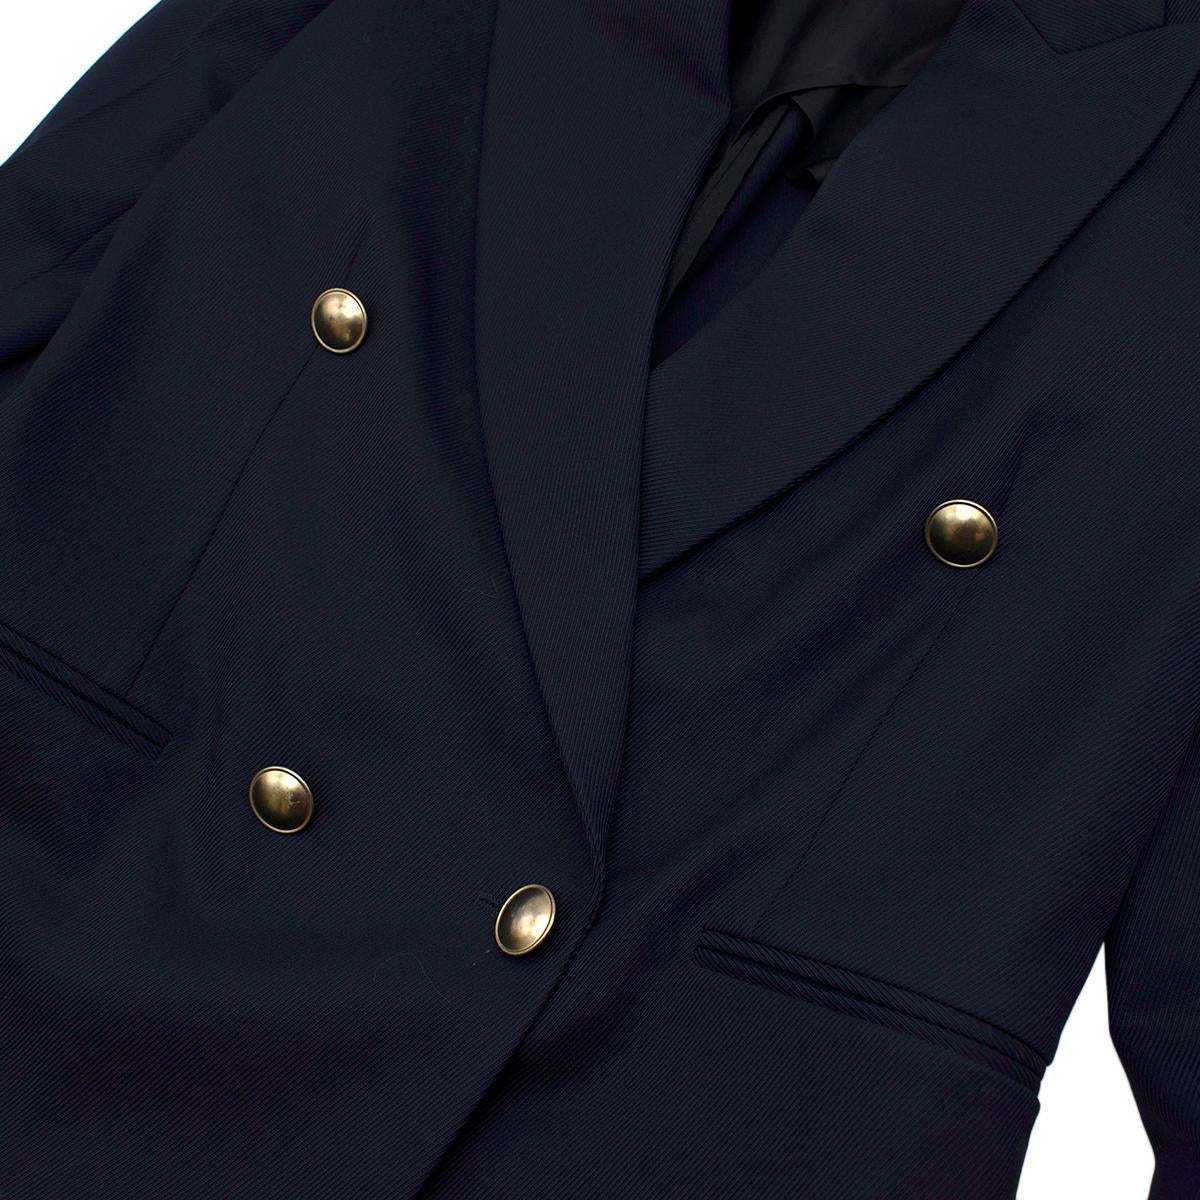 Victoria Beckham Double Breasted Navy Blazer - US size 4 In New Condition For Sale In London, GB